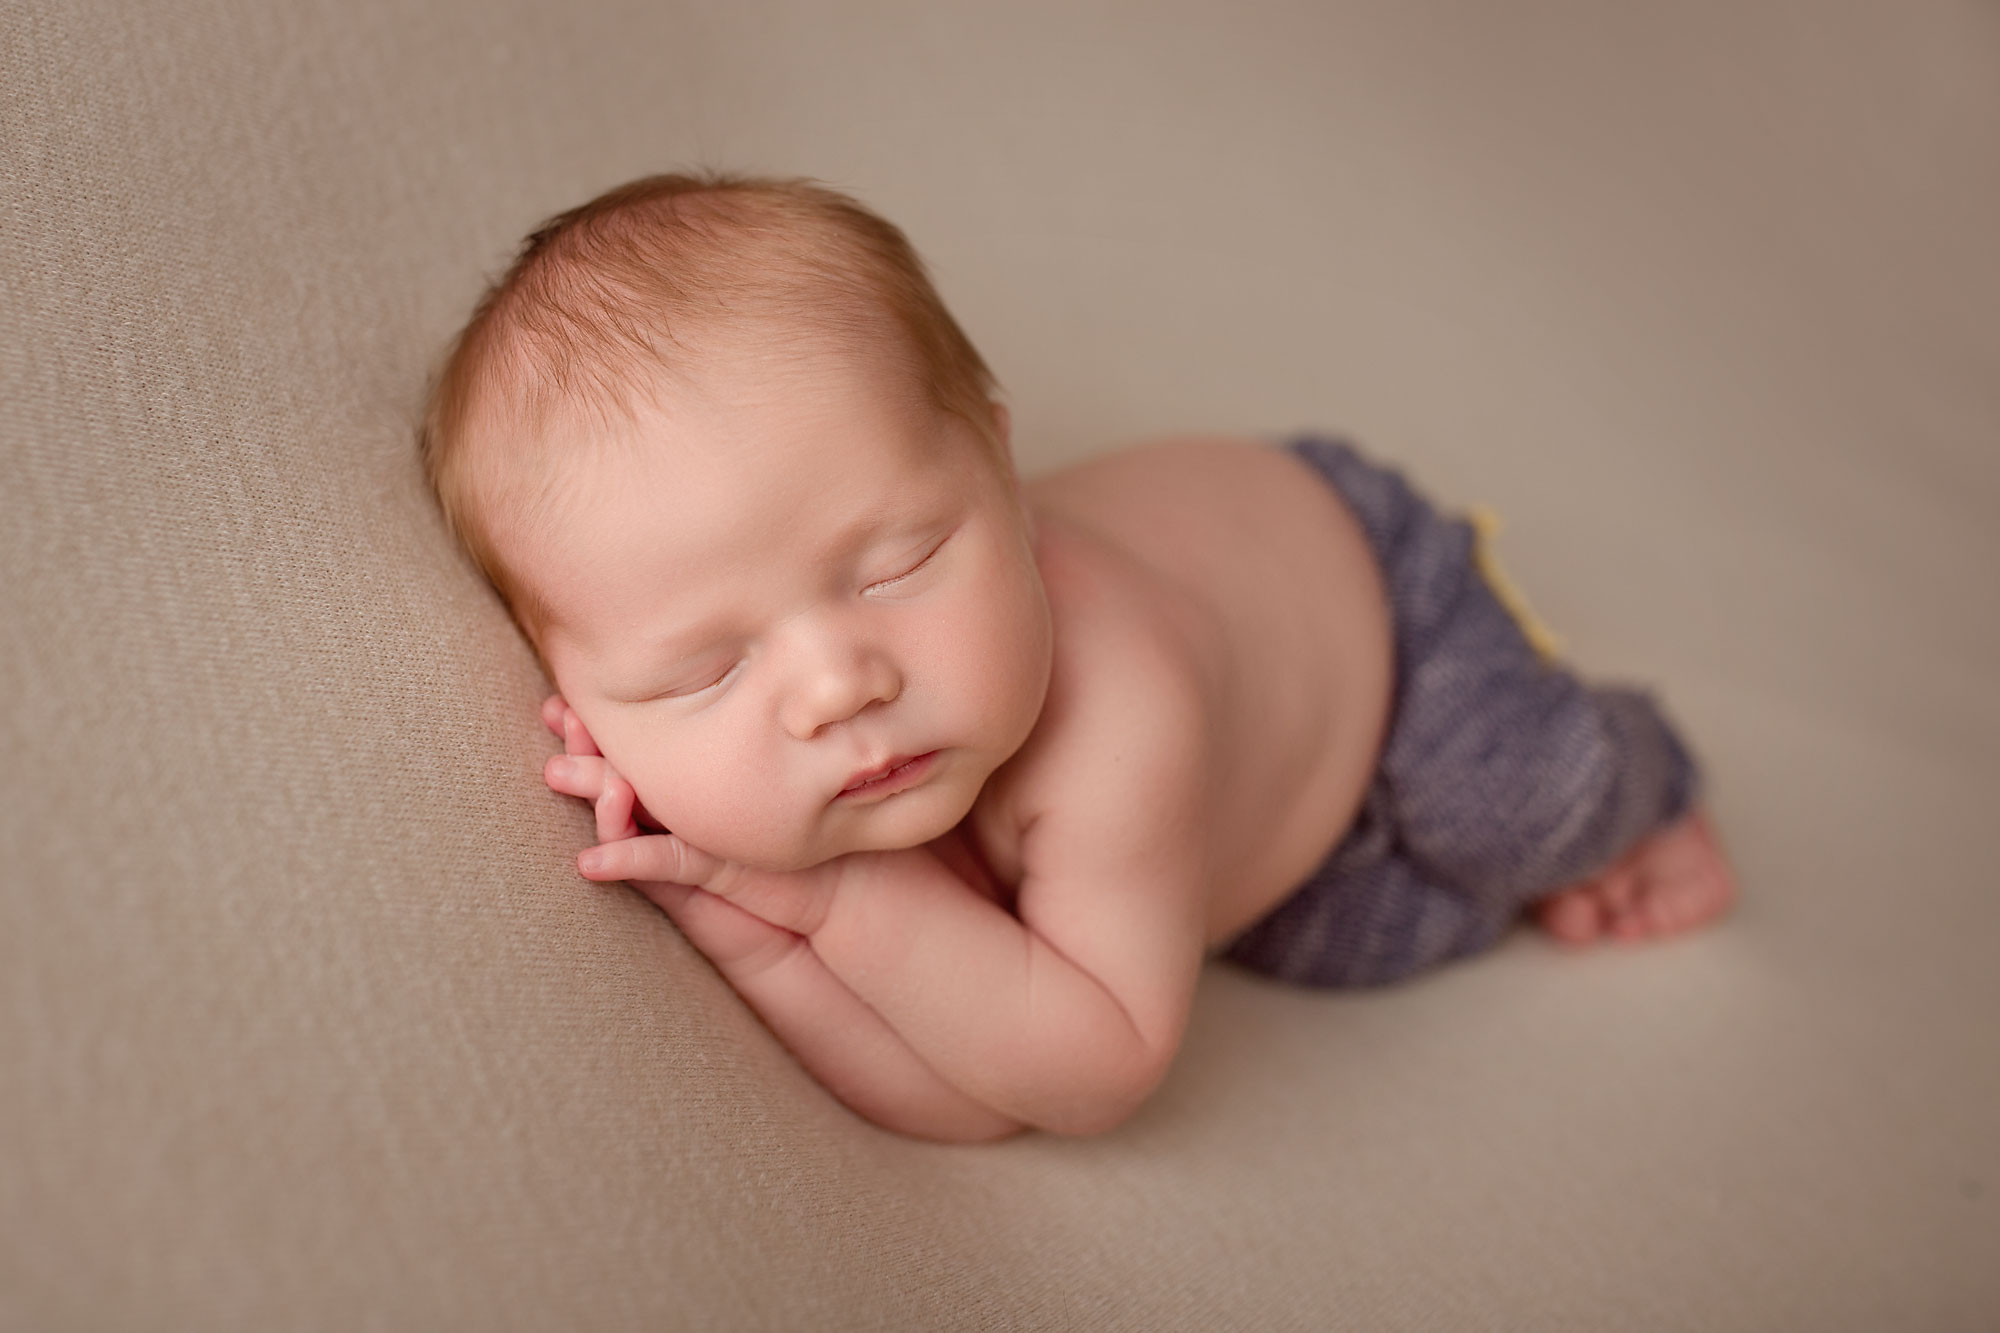 nj baby pictures, infant boy sleeping with hands clasped under cheek